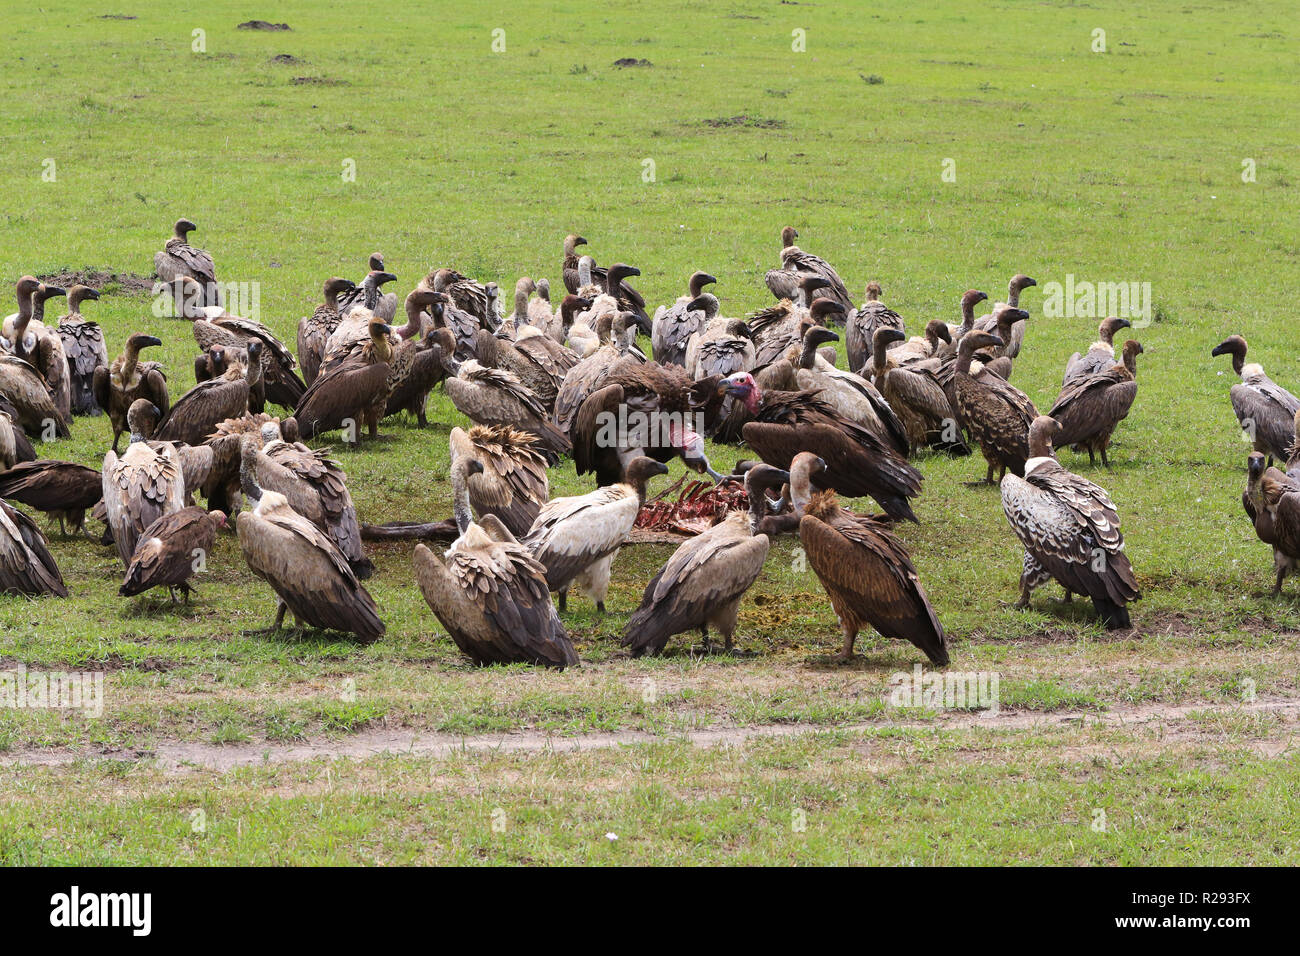 Vultures are scavenging off a wildebeest carcass from a kill by five cheetahs in Masai Mara Game Park, Narok County, Kenya. Stock Photo